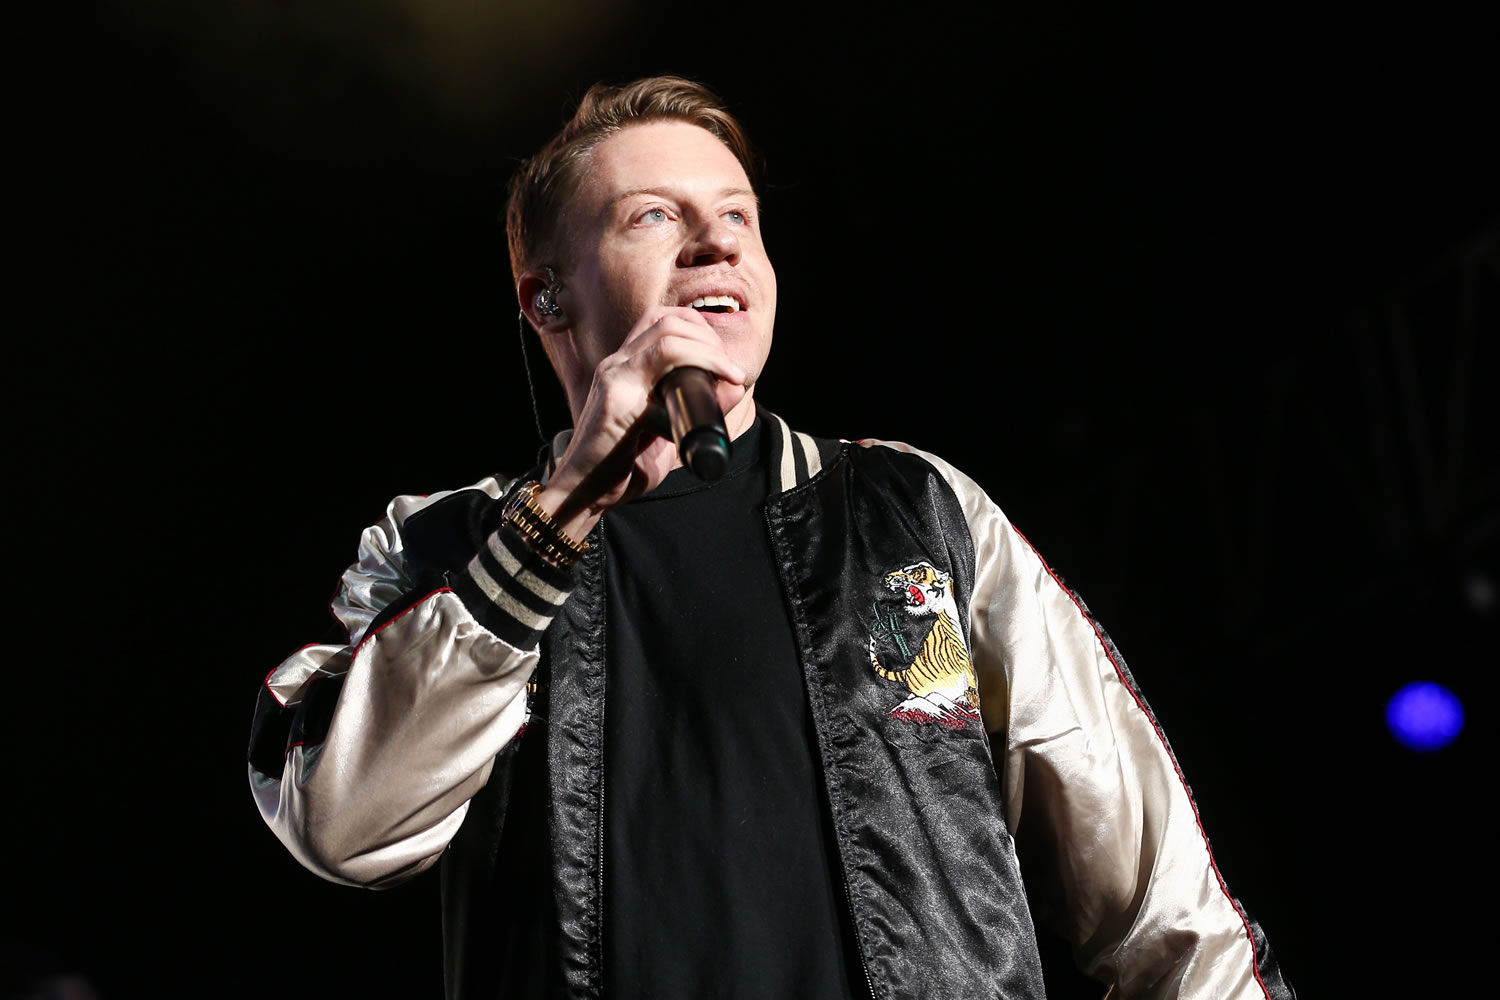 Macklemore explores racism and hip-hop in the song &quot;White Privilege II,&quot; rapping about a white person&#039;s position in society with black people fighting injustice.